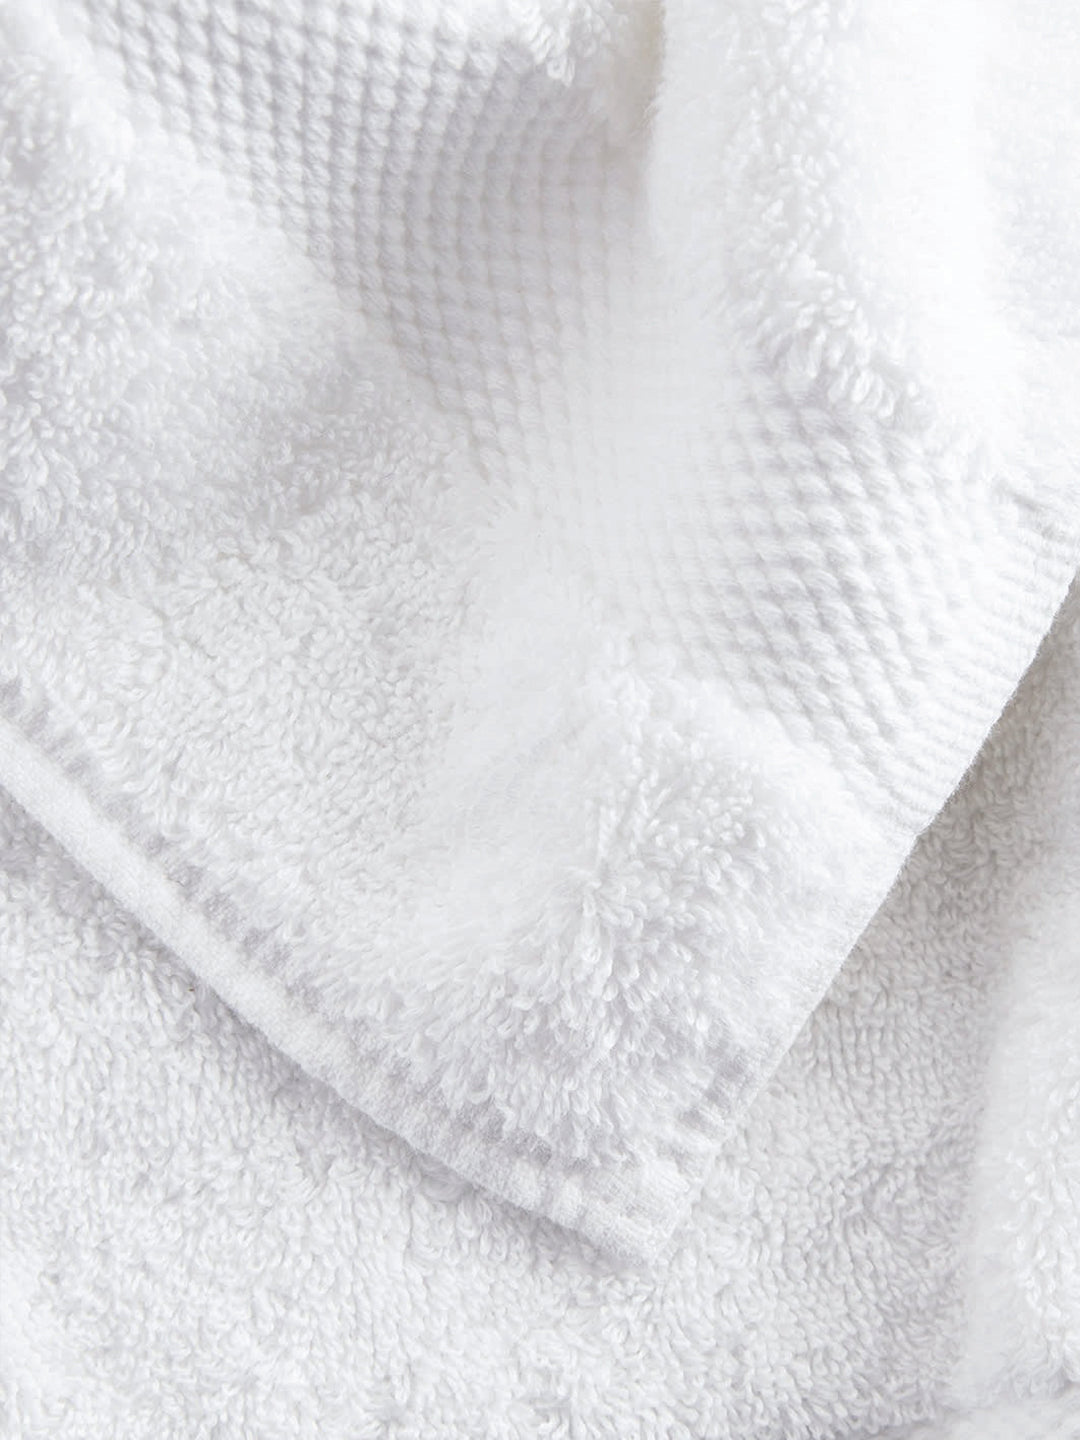 Face Towels (Set of 3) Organic Cotton - White